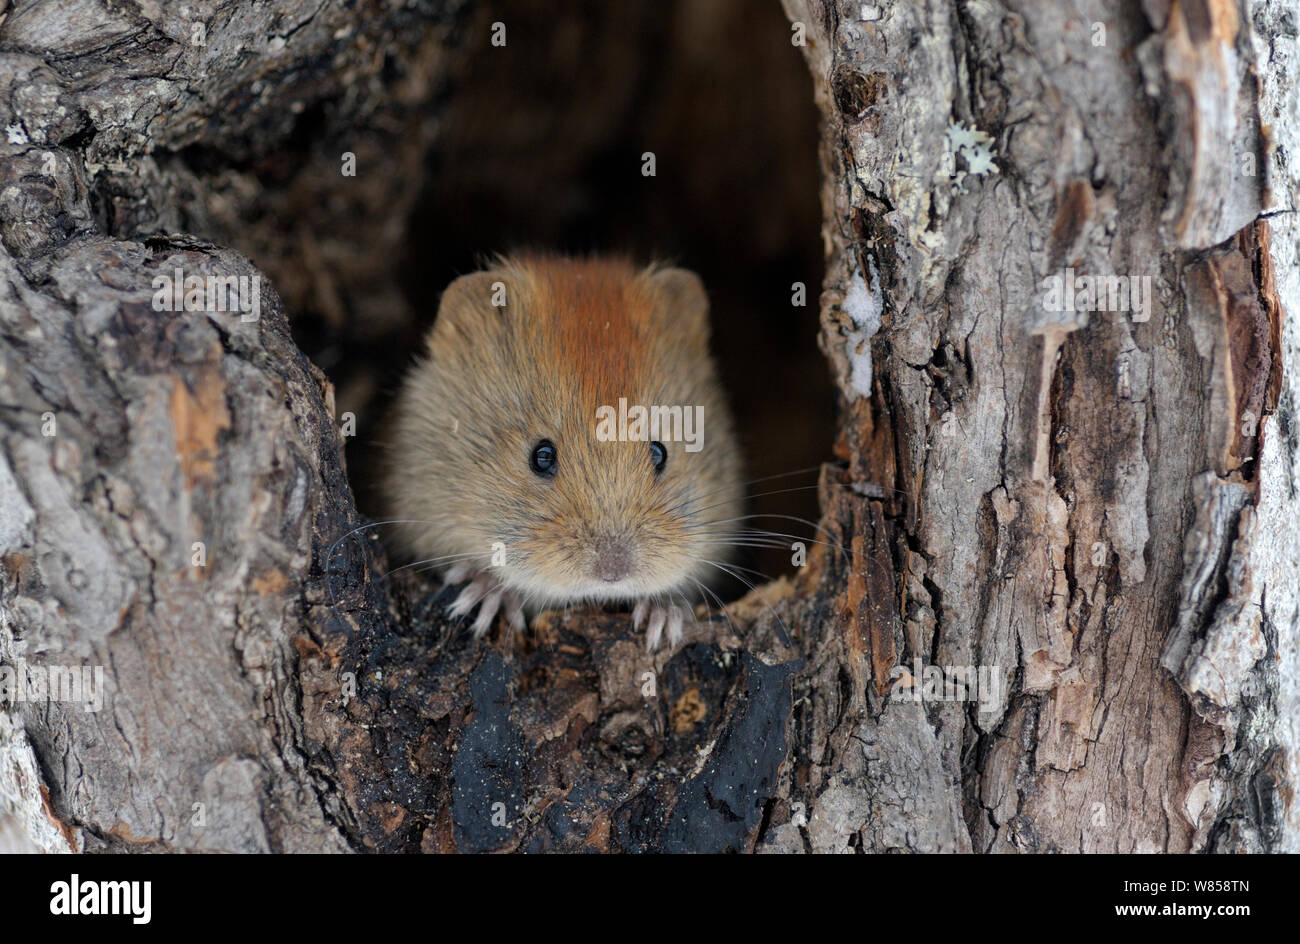 https://c8.alamy.com/comp/W858TN/northern-red-backed-vole-cletrionomus-rufocanos-myodes-rutilus-looking-from-hole-in-tree-kronotsky-zapovednik-nature-reserve-kamchatka-peninsula-russian-far-east-september-W858TN.jpg